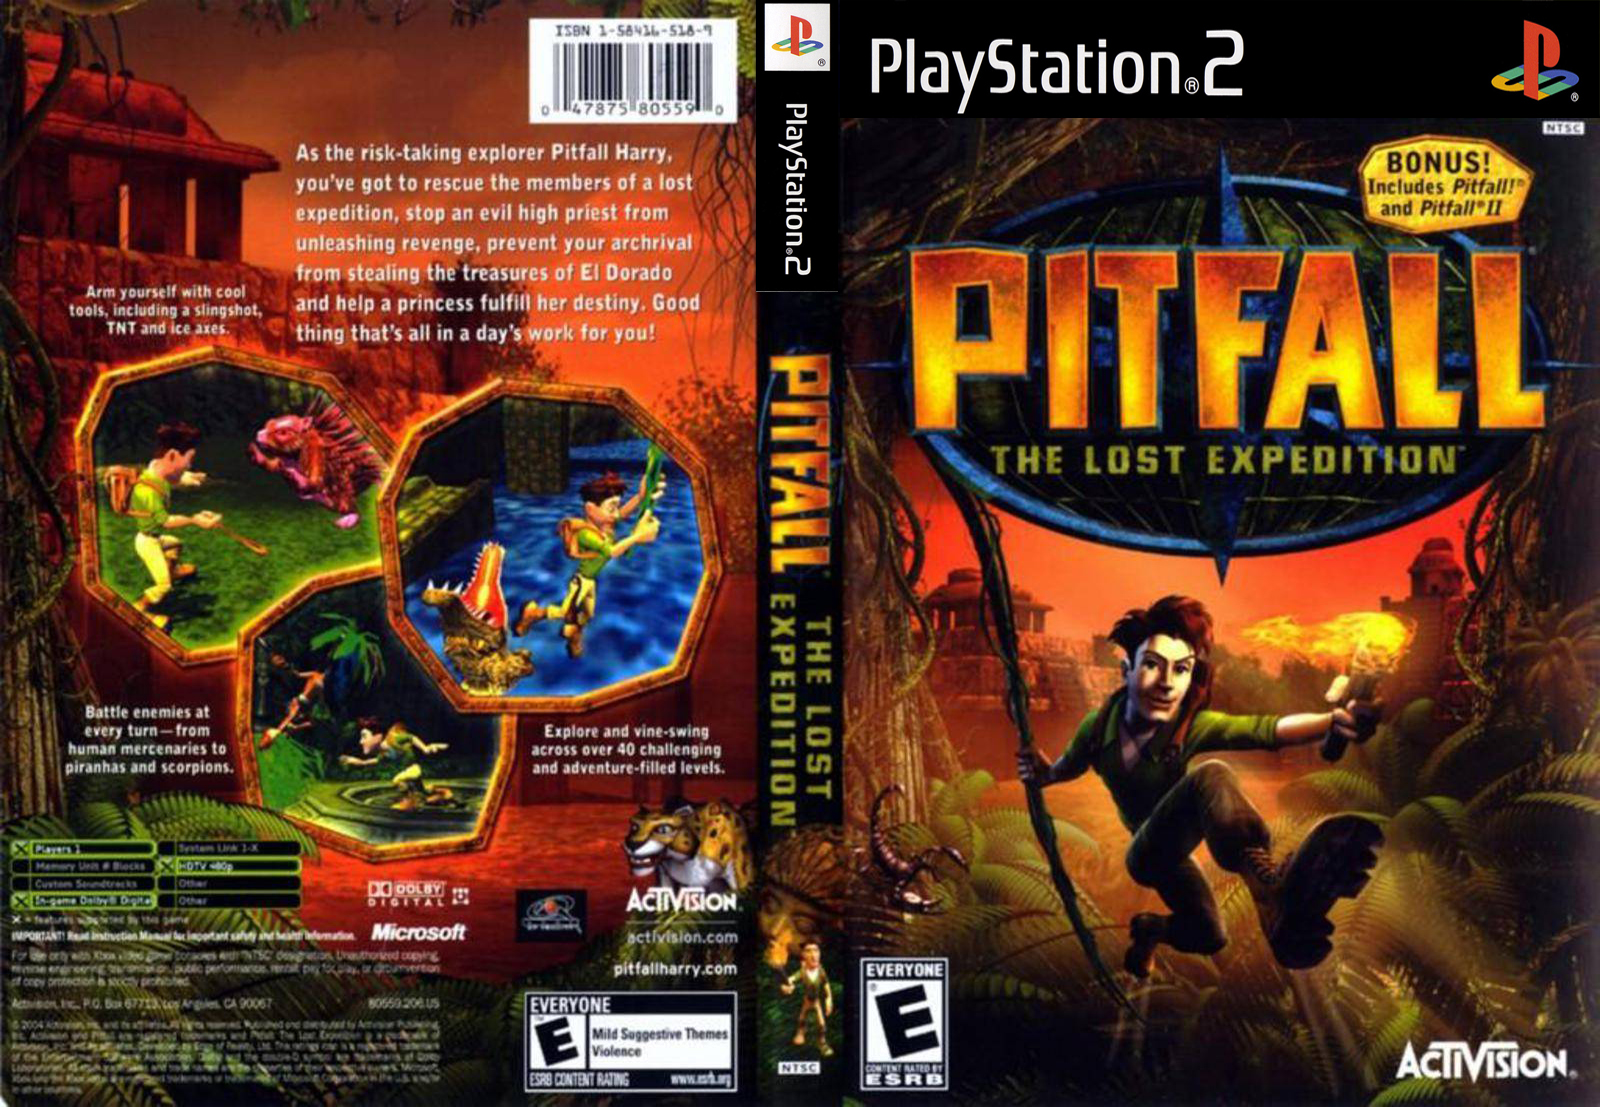 Pitfall the lost expedition ps2 iso torrent resident evil 4 pc game free download utorrent